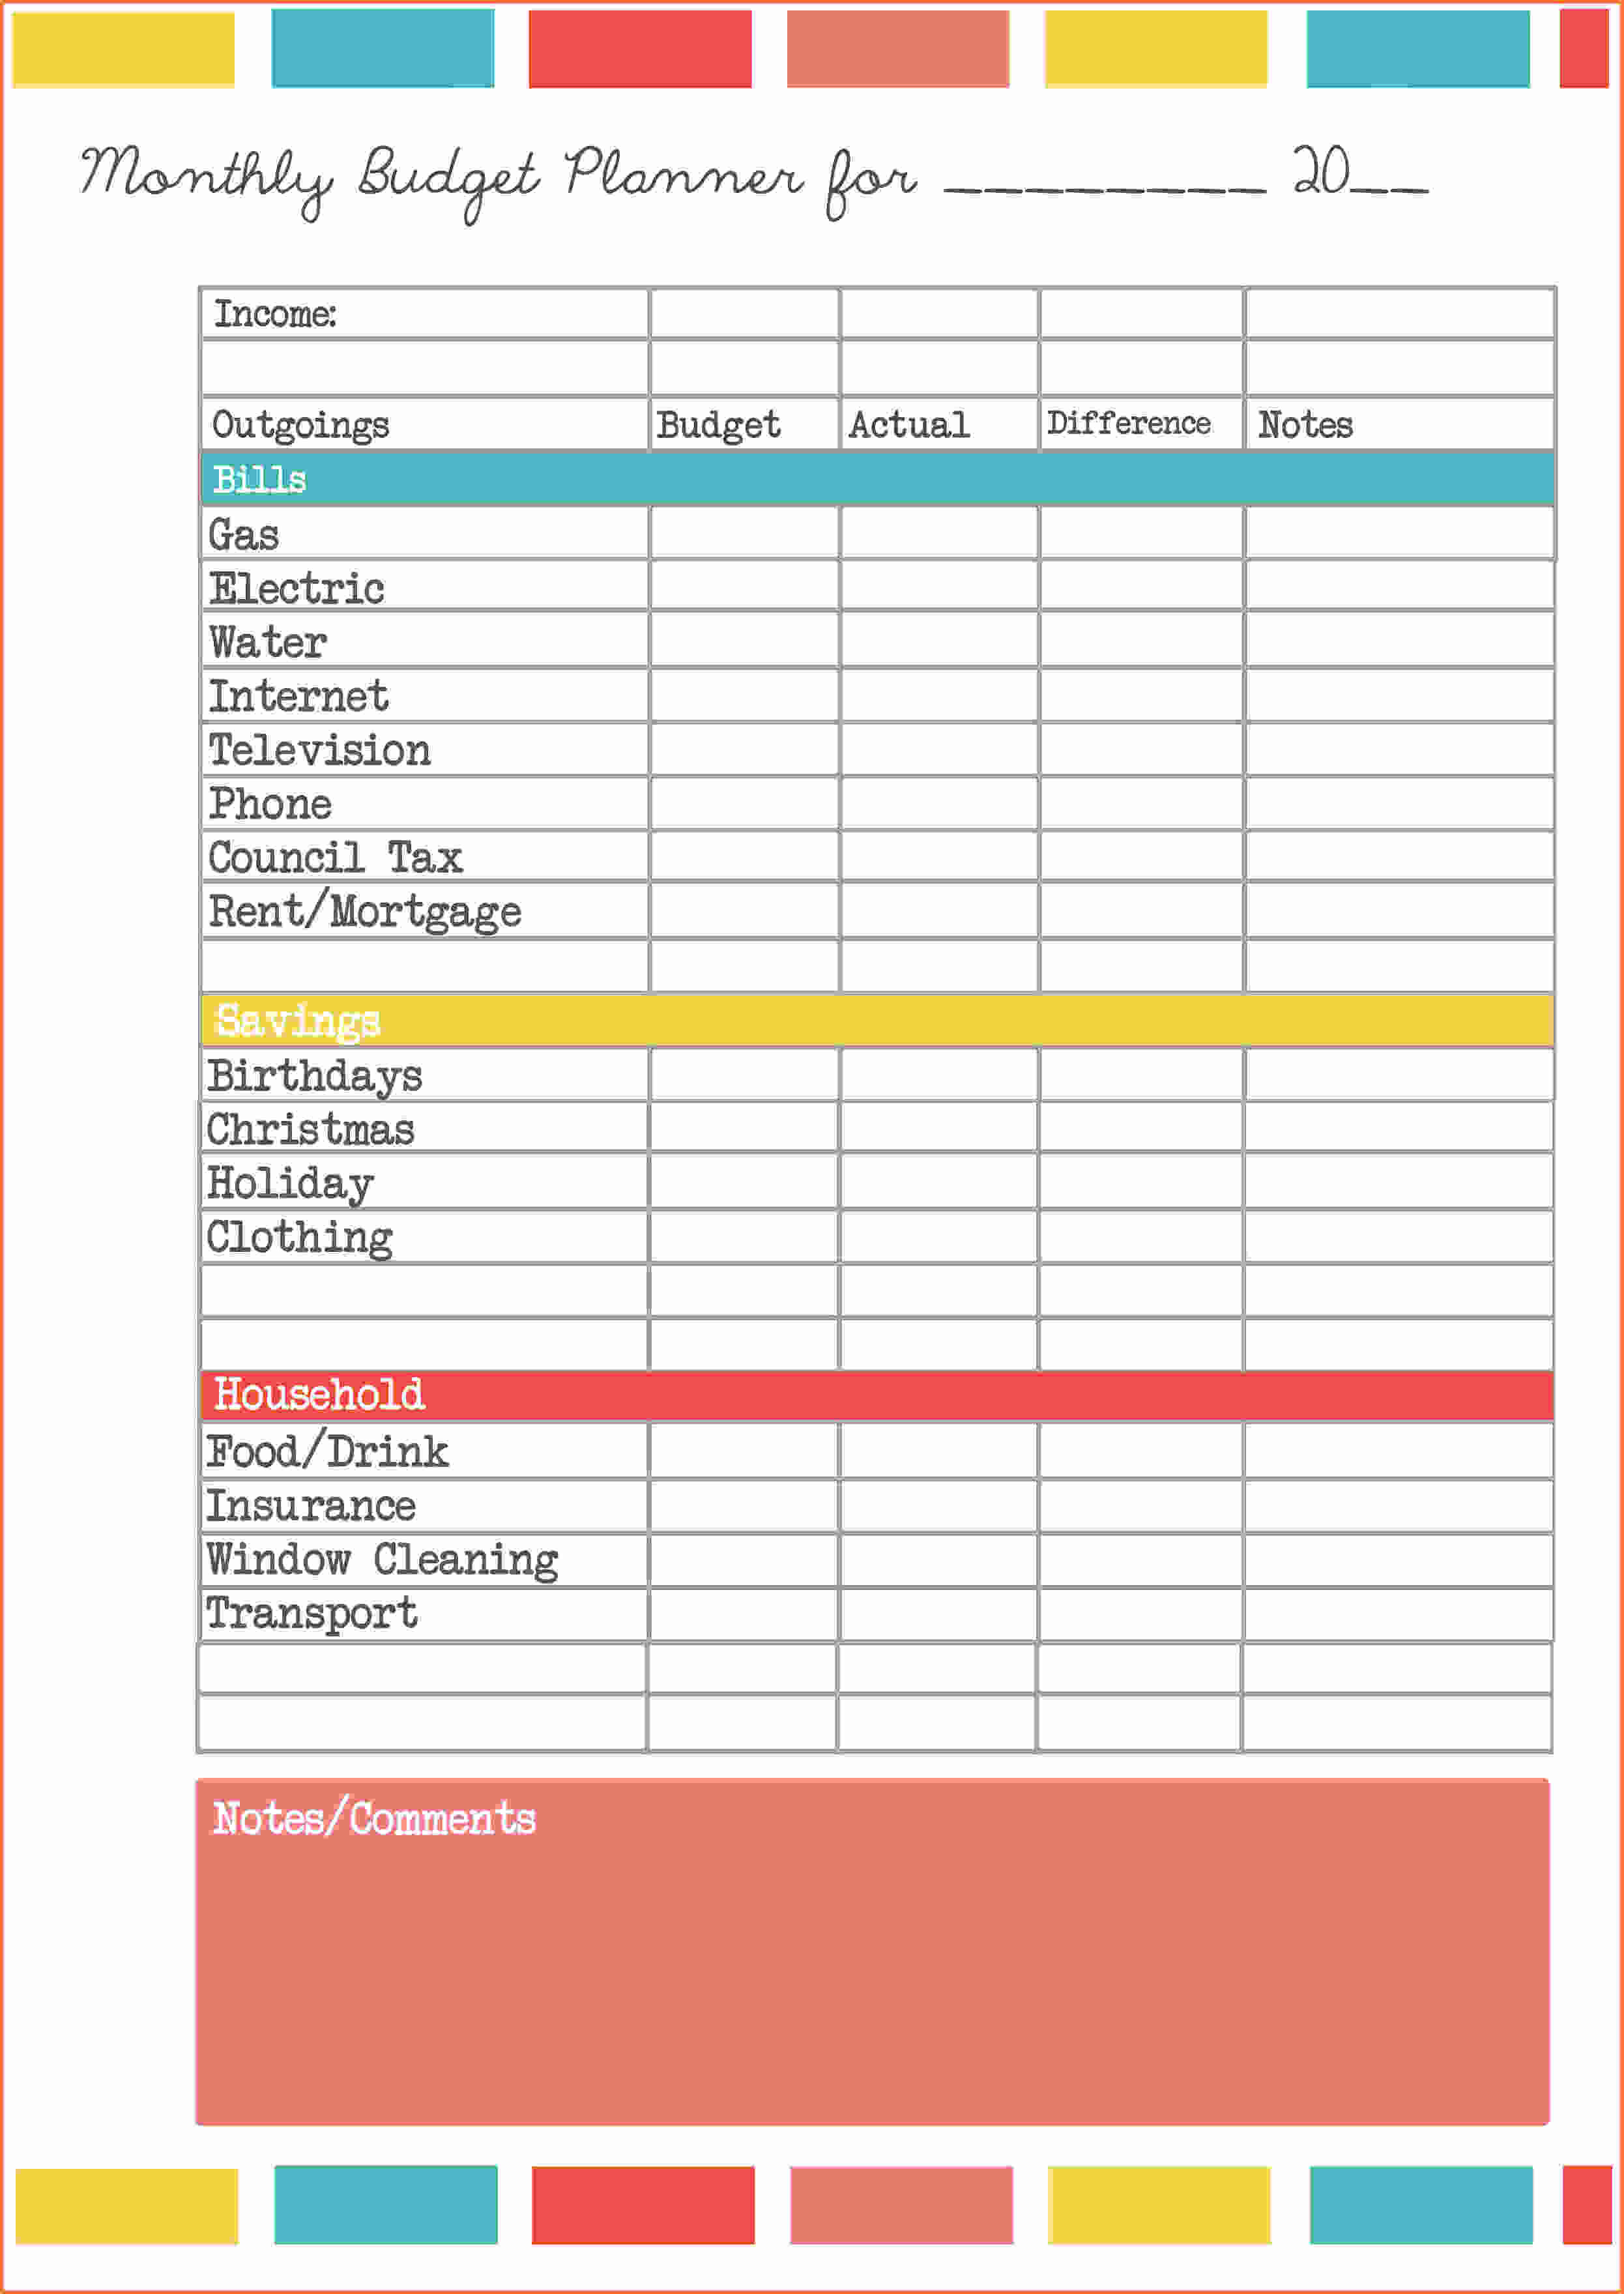 free-budget-spreadsheet-intended-for-budget-planning-spreadsheet